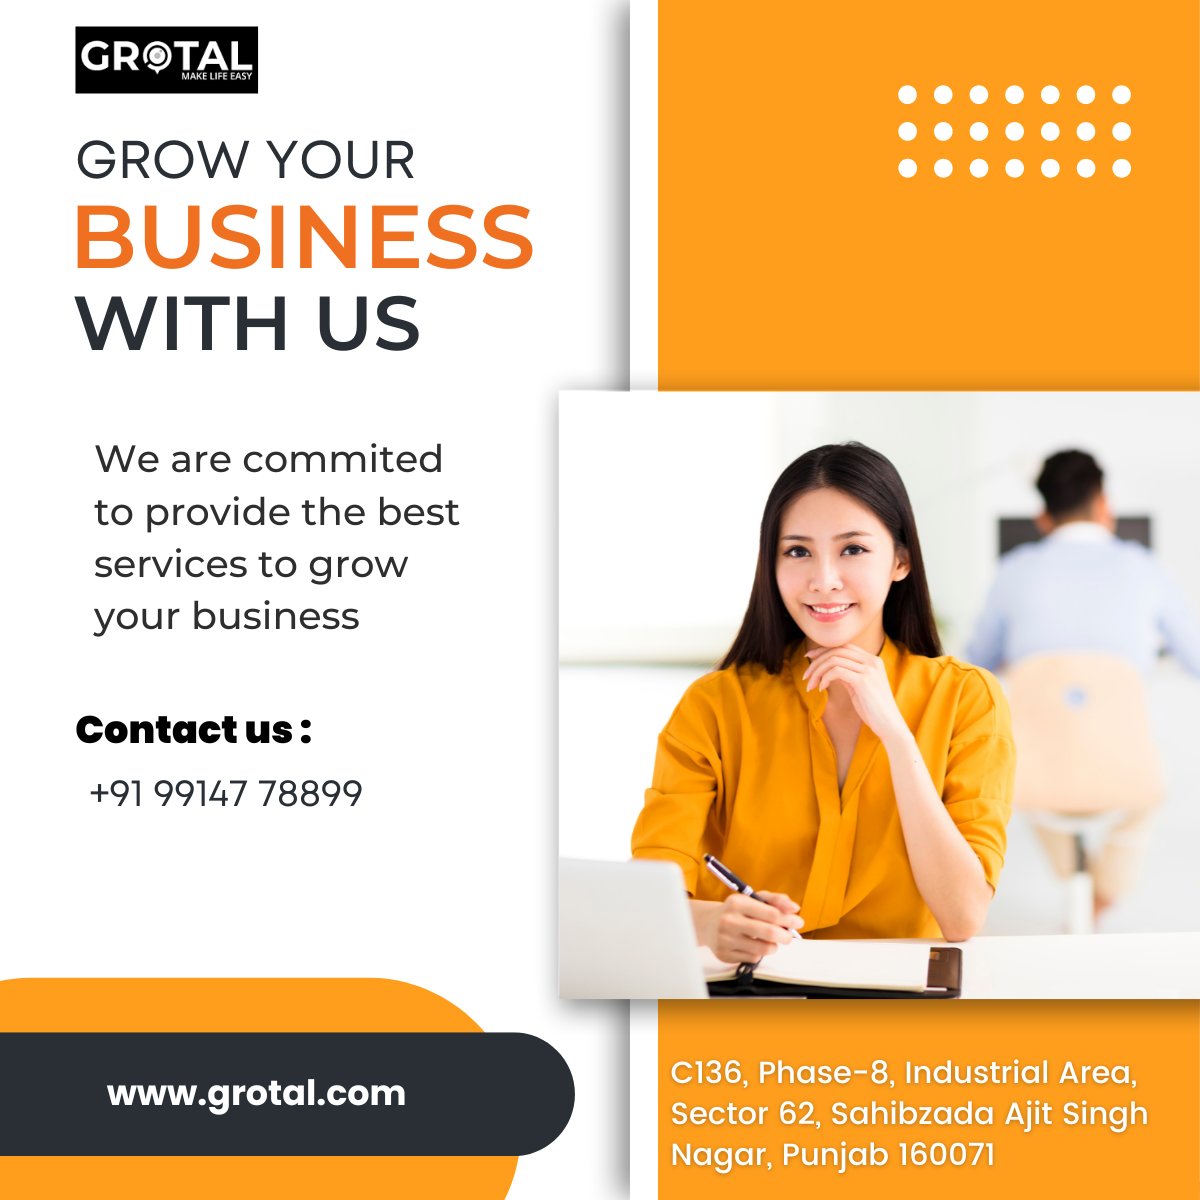 #strength and #growth come only through continuous effort and a good platform. Looking for the best platform to grow your business rapidly? Then, register your business with #grotal today and set a milestone.

 #success #business #growyourbusiness #businessman #successmindset